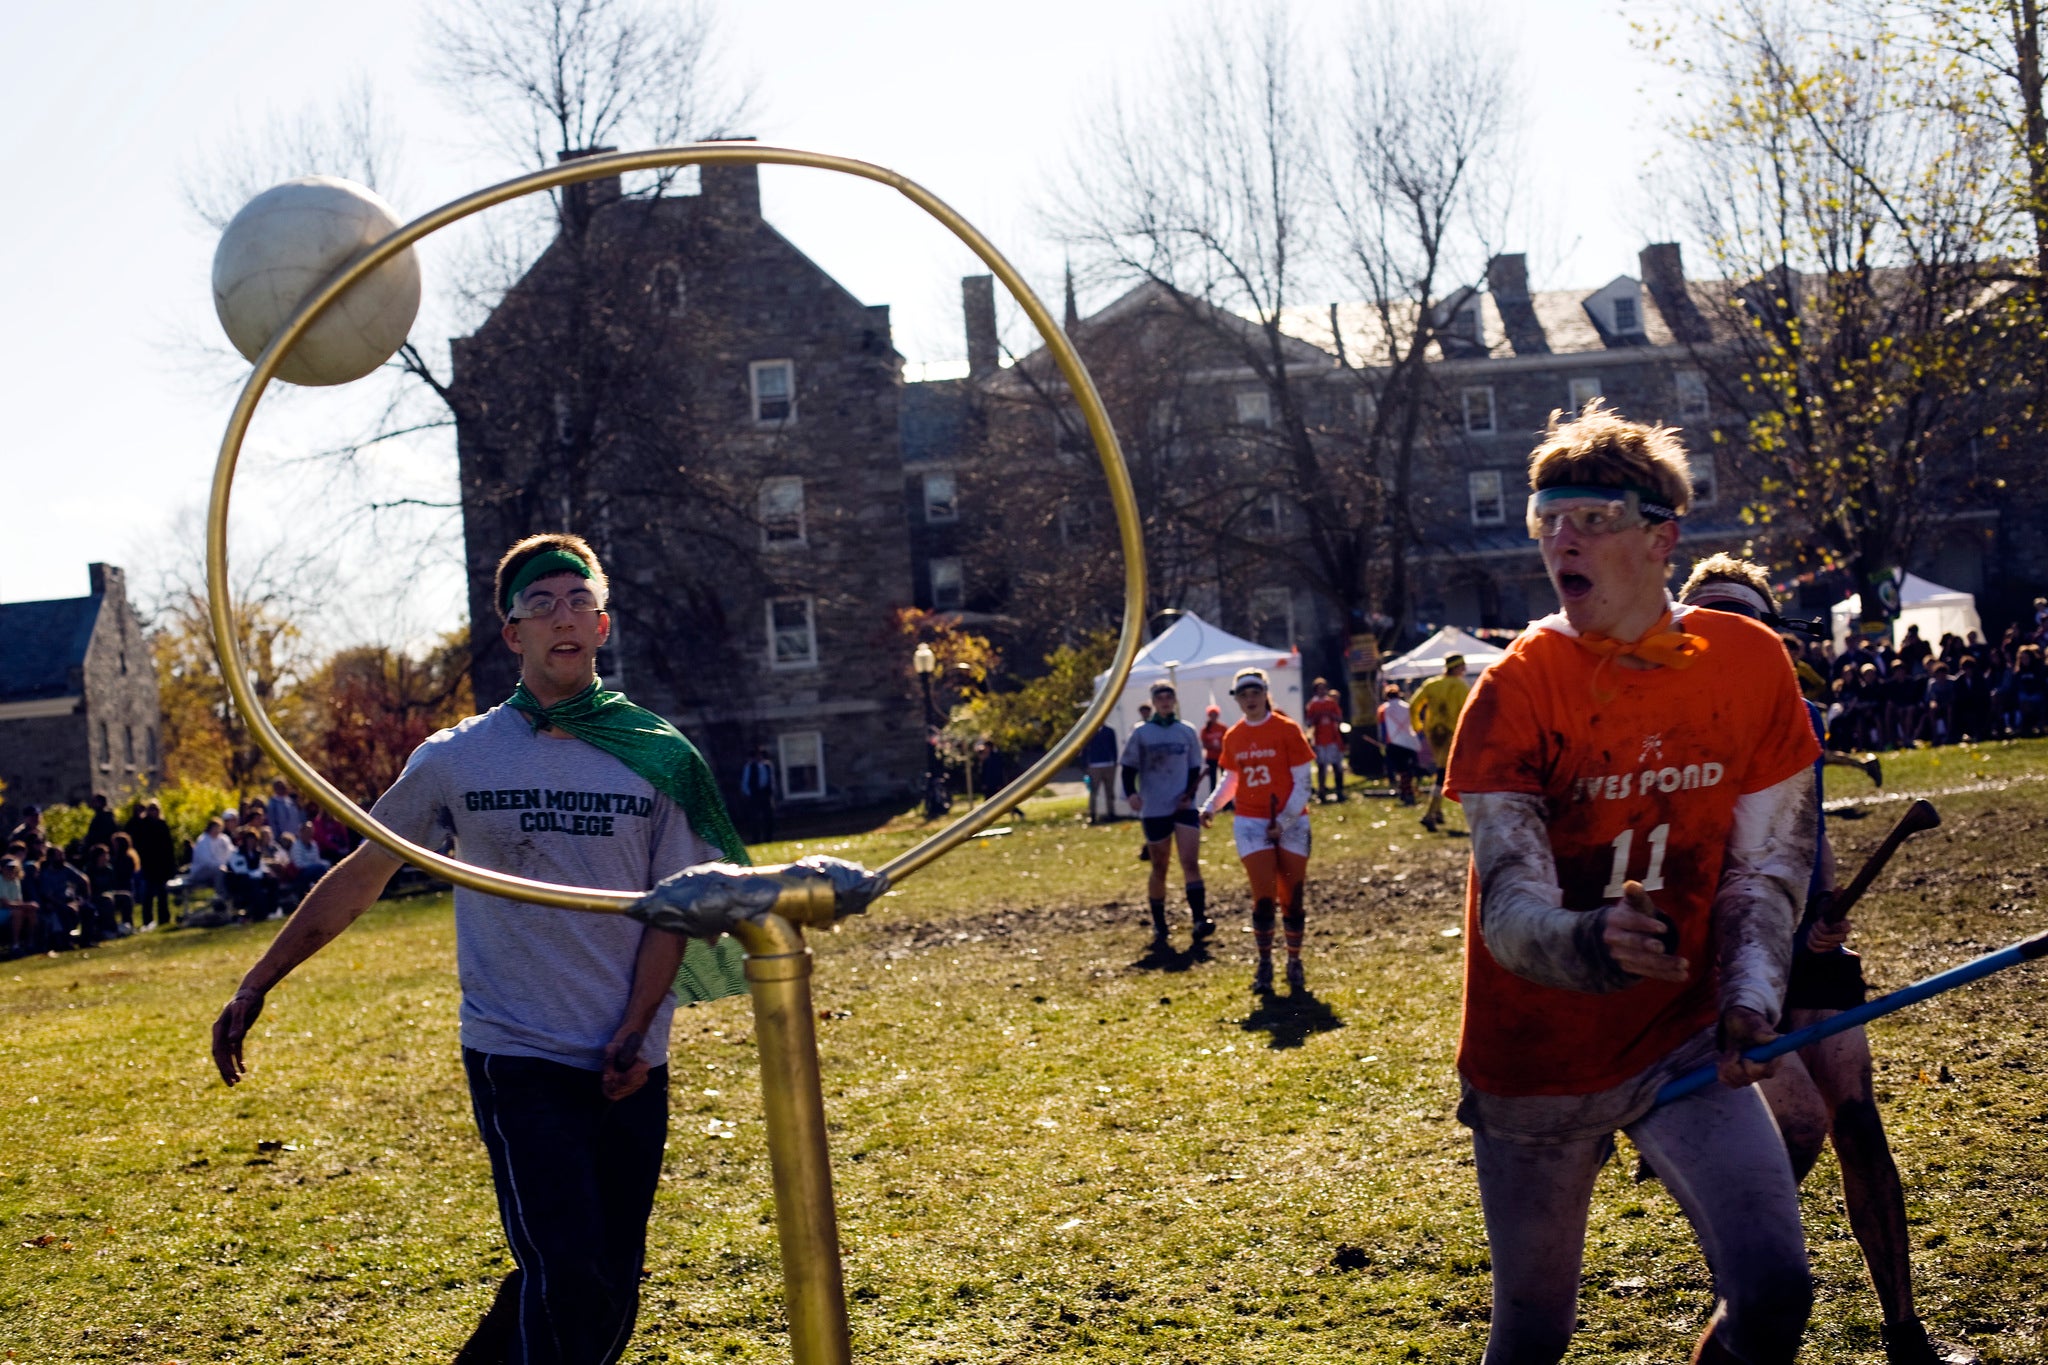 Pictured: Not real Quidditch.